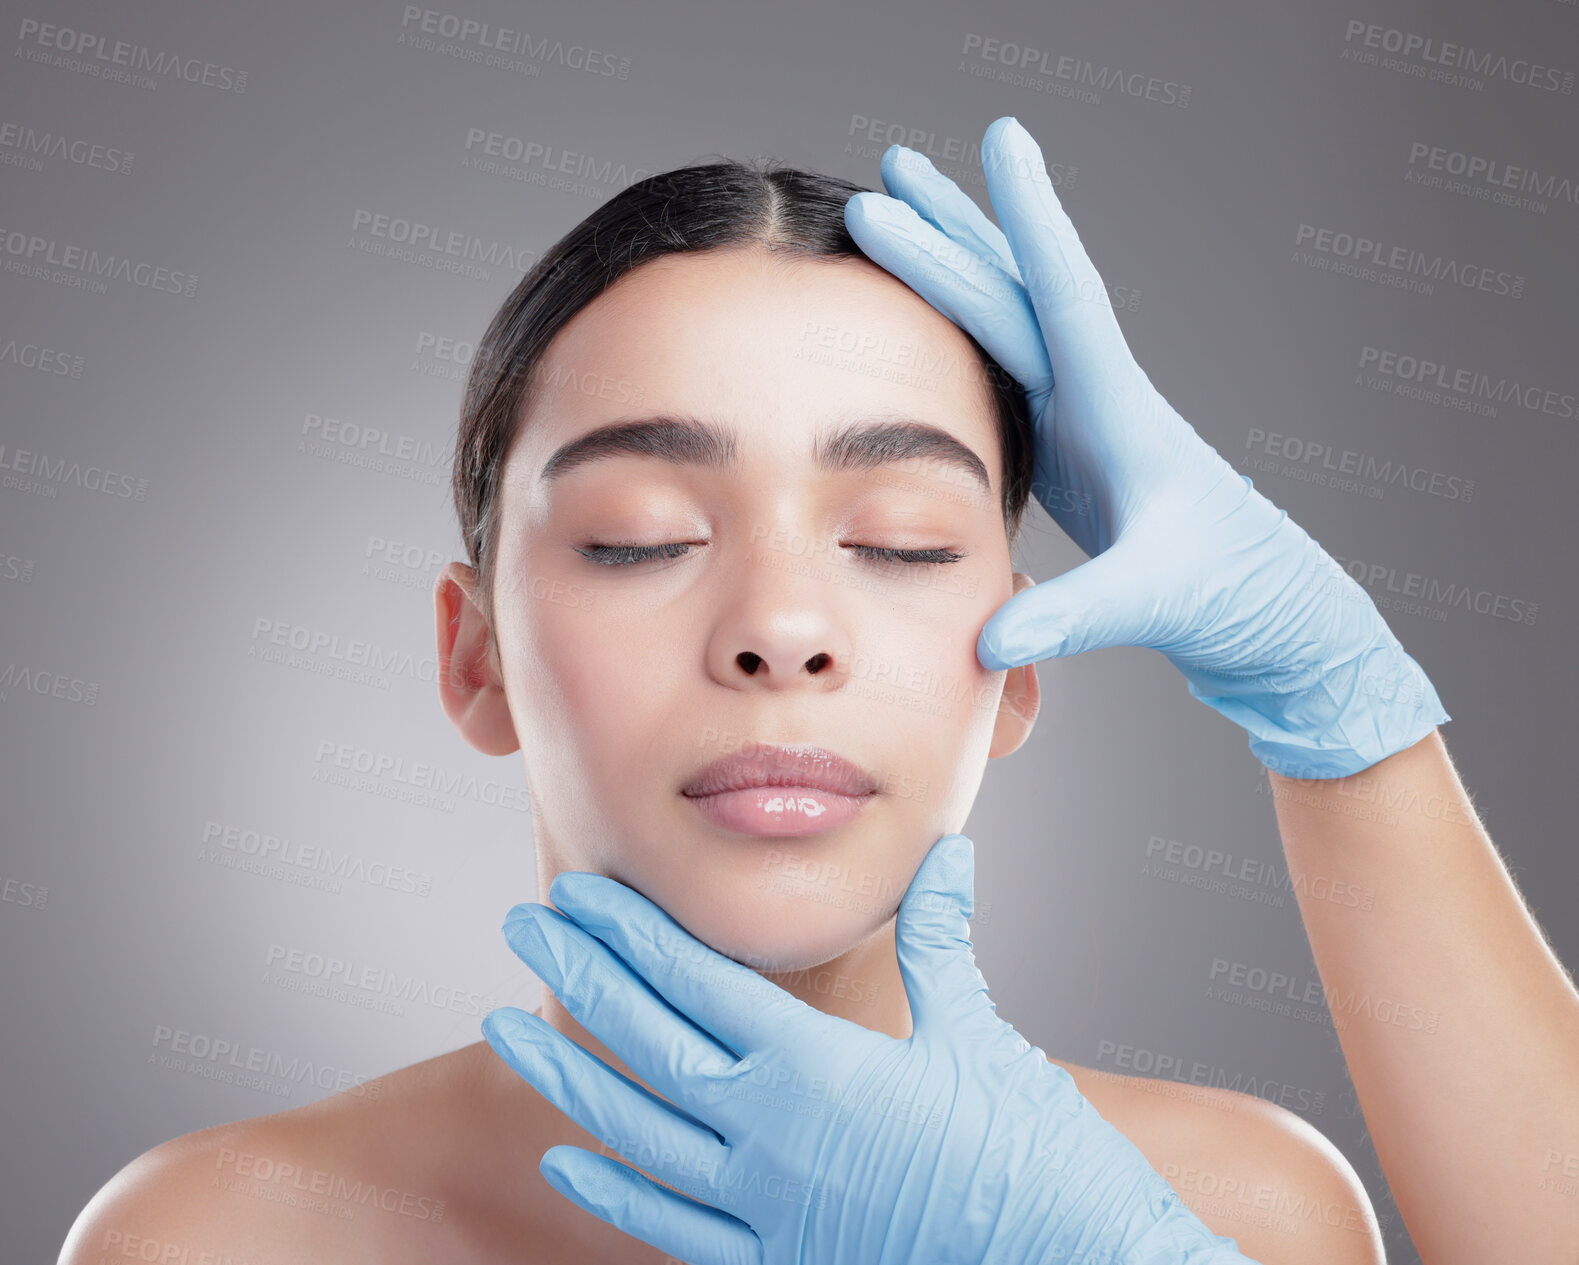 Buy stock photo Studio shot of an attractive young woman having some plastic surgery done against a grey background